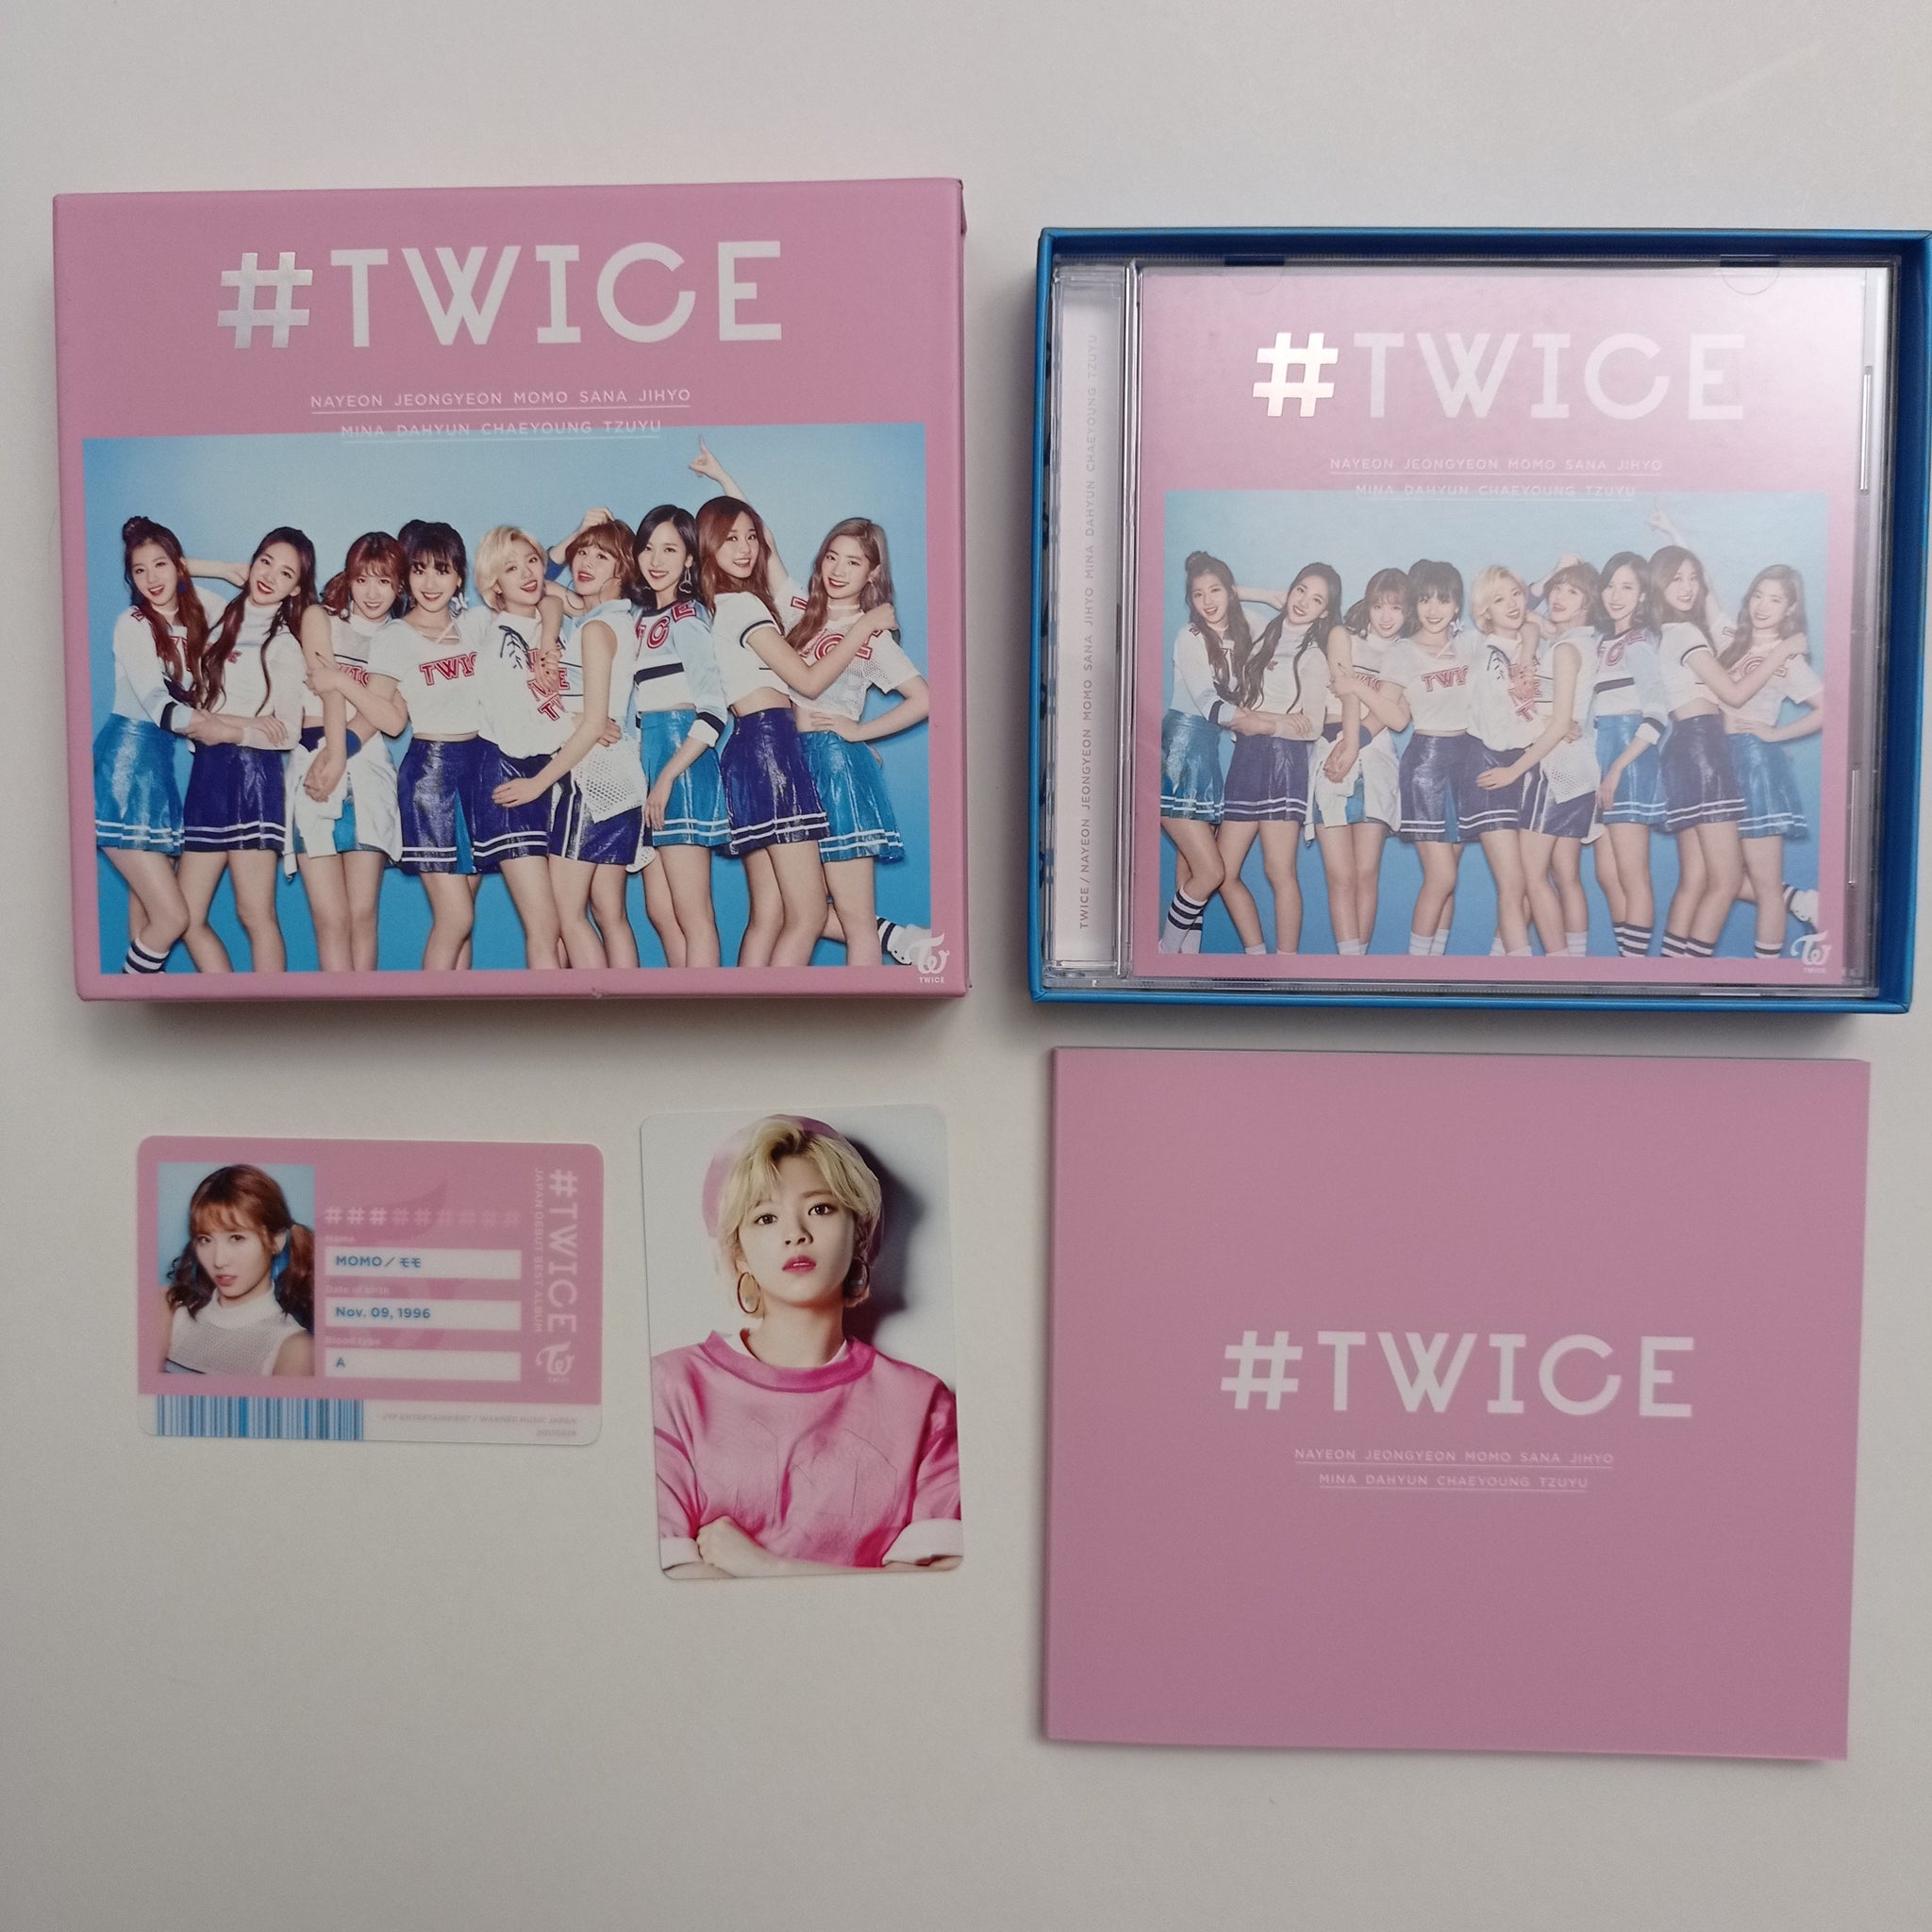 TWICE - #TWICE Limited Edition A ver. (NUEVO) 1st Album debut